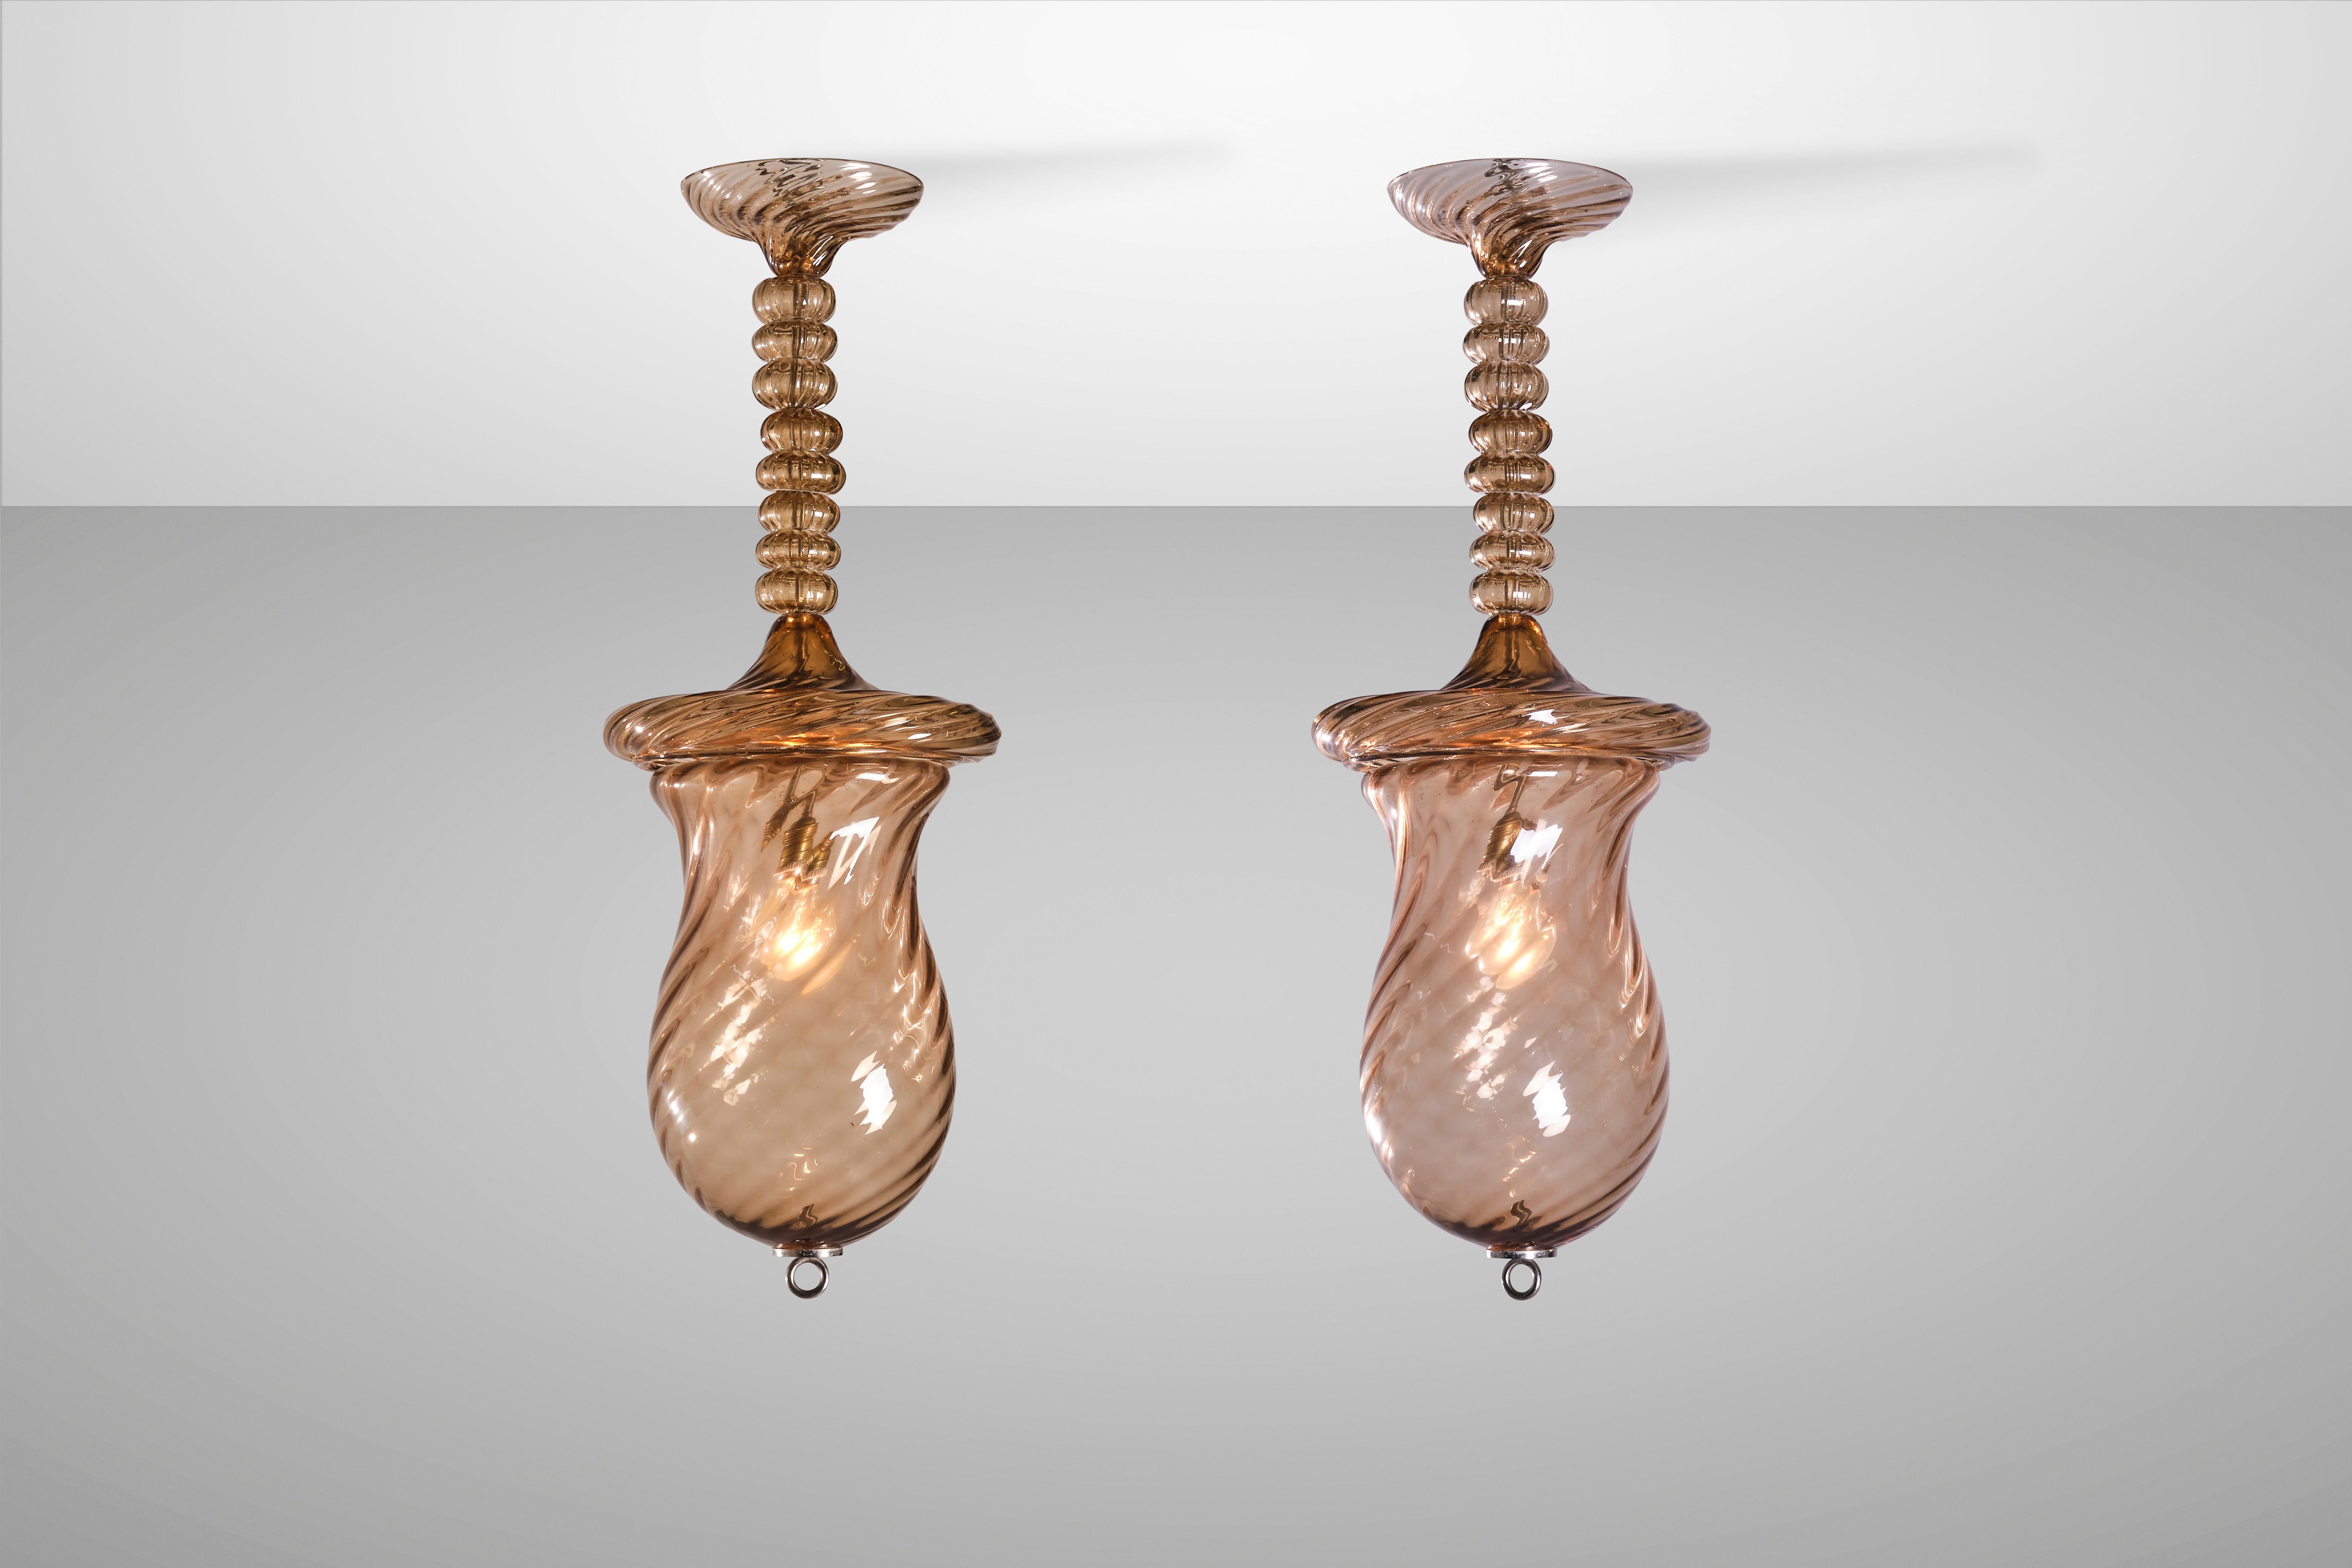 Lighting that manages to be both decorative and functional at the same time is one that becomes a classic over time. These amber-coloured cup pendants made of twisted Rigadin (striped) blown glass are timelessly beautiful, bringing with them the